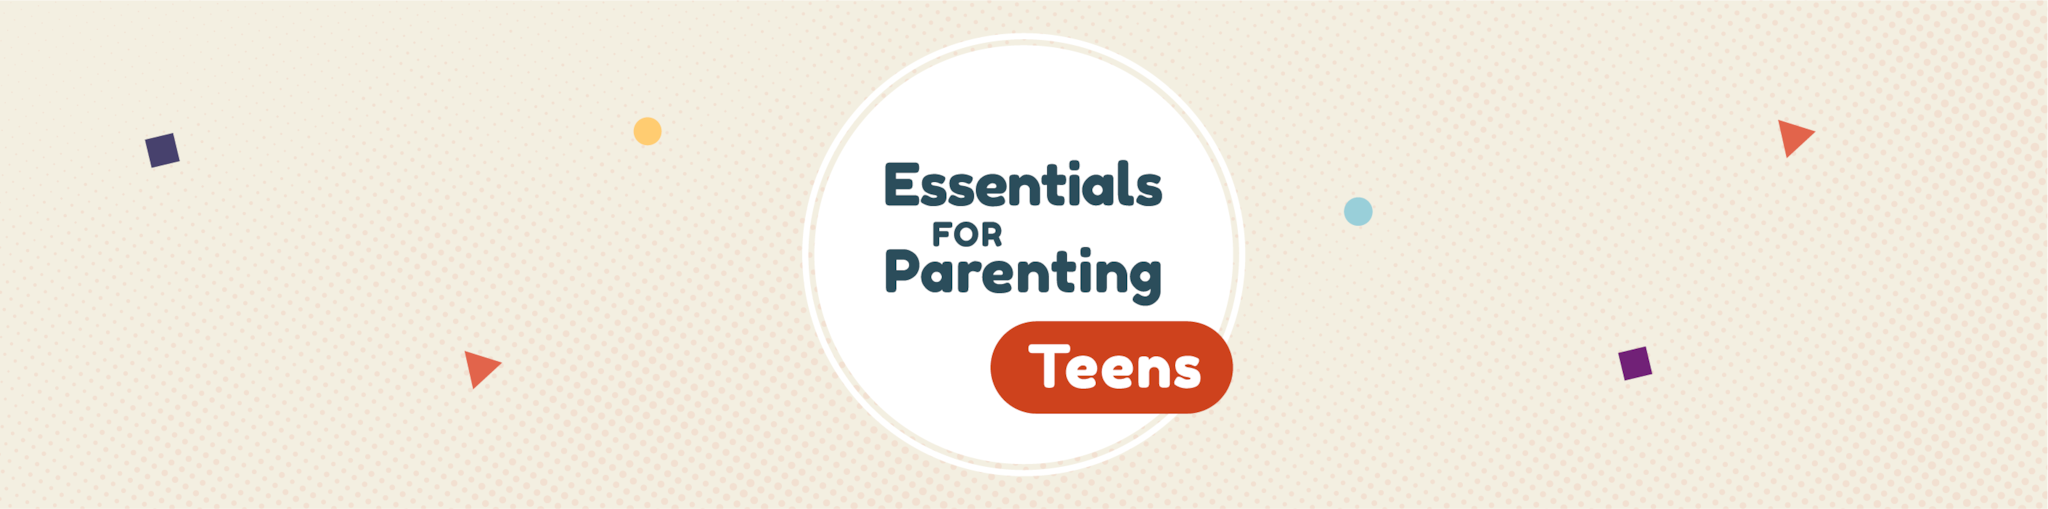 Essentials for Parenting Teens banner